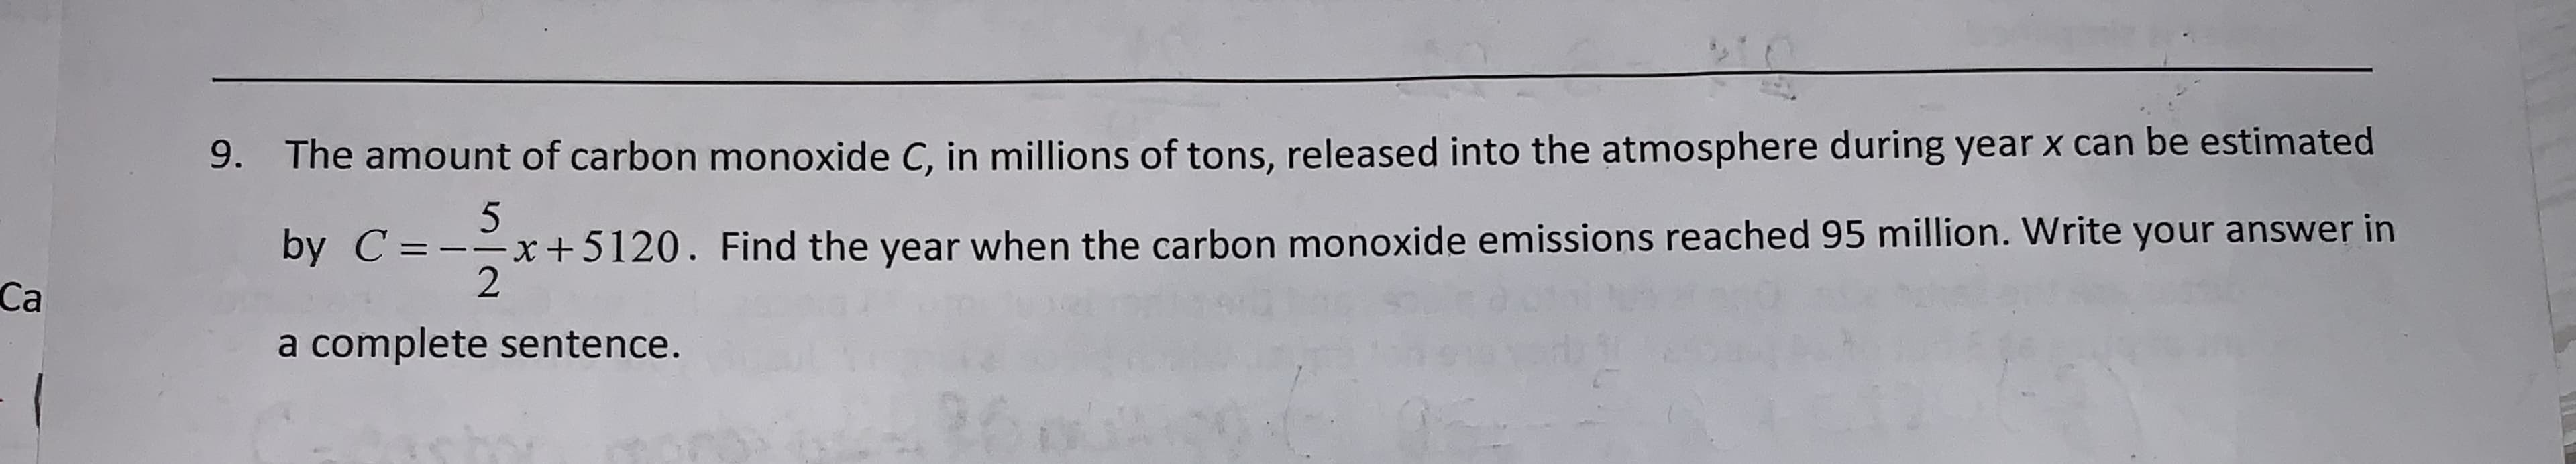 The amount of carbon monoxide C, in millions of tons, released into the atmosphere during year x can be estimated
9.
5
by C=-x+5120. Find the year when the carbon monoxide emissions reached 95 million. Write your answer in
Са
a complete sentence.
32
260
